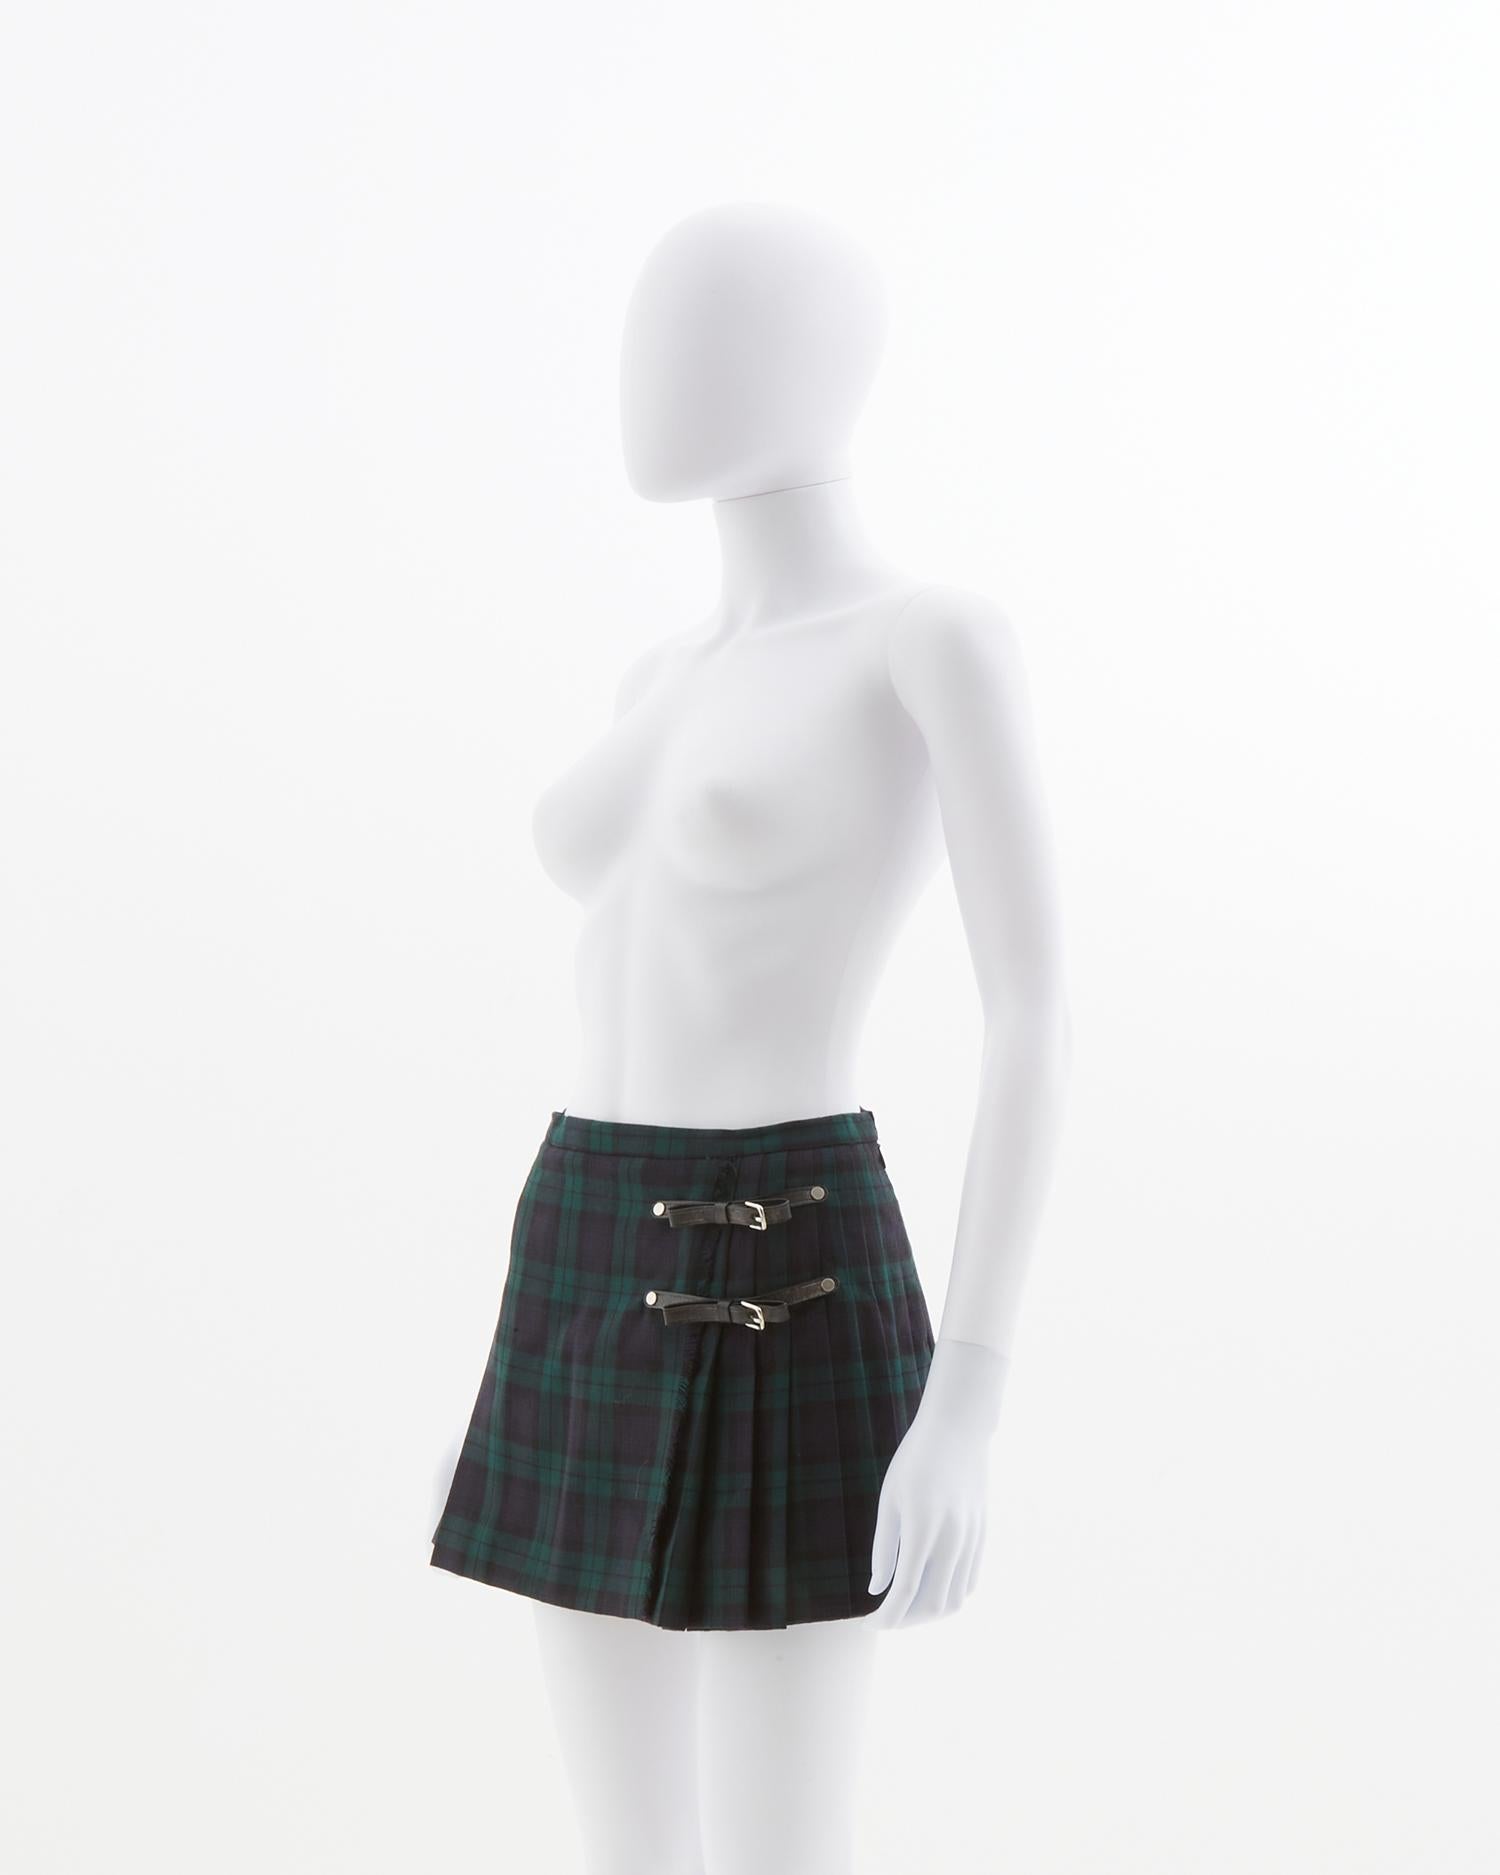 - Green black and yellow checked mini skirt 
- Sold by Skof.Archive
- Buckle bow detail 
- Back side zipper 
- Fall Winter 2004 

Size: 
FR 36 - IT 40 - UK 8 - US 4 (EU)

Measurements:
Waist 32 cm / 12”
Total Length  34 cm / 13”

Composition: 
100%